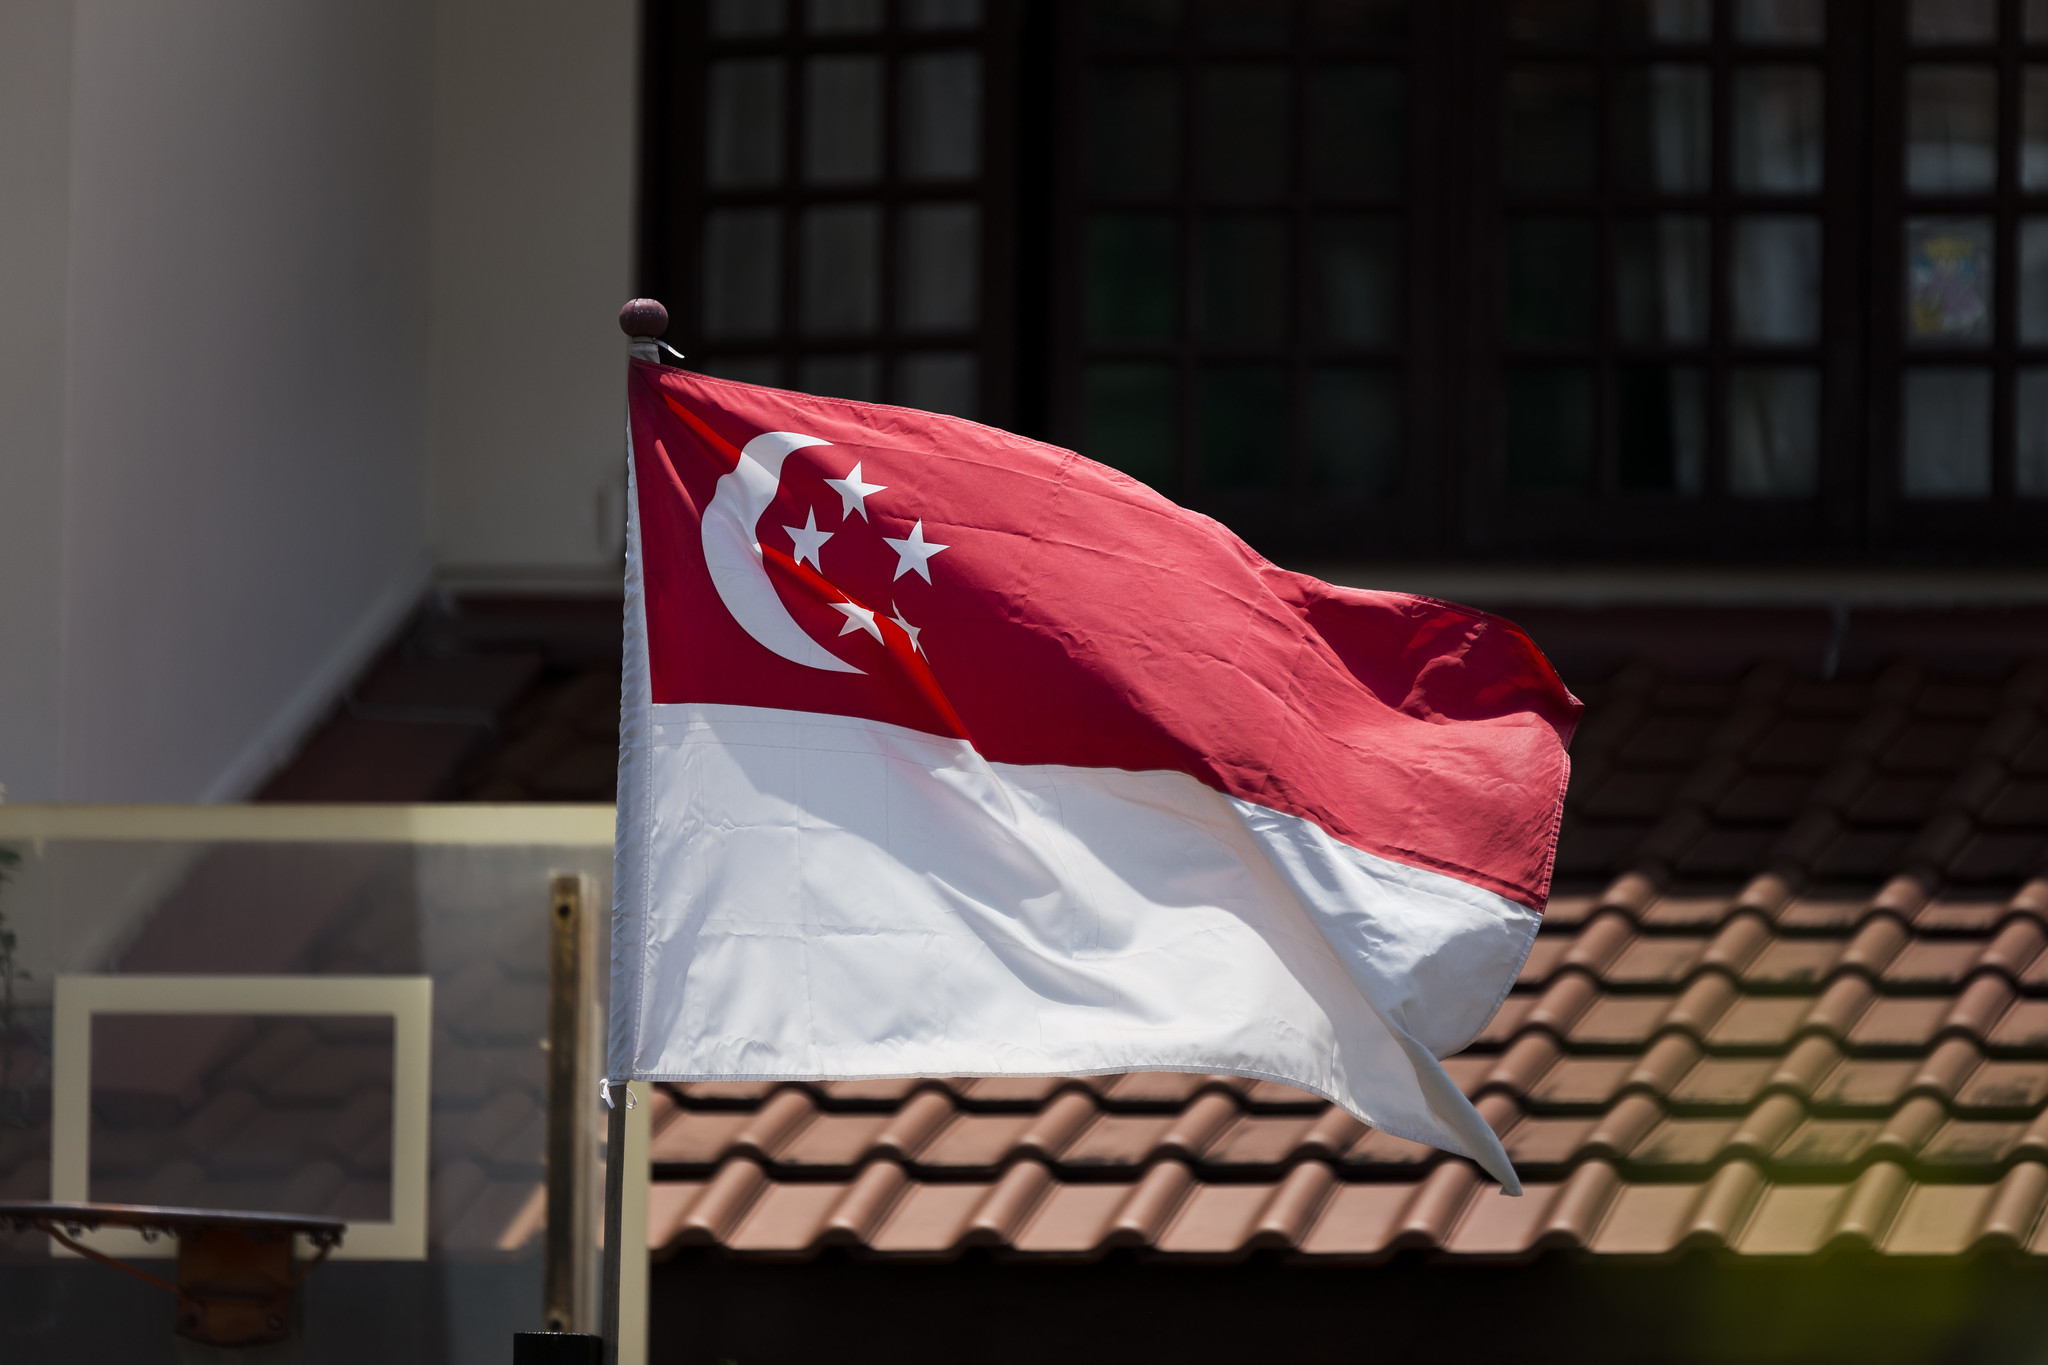 The national flag of Singapore